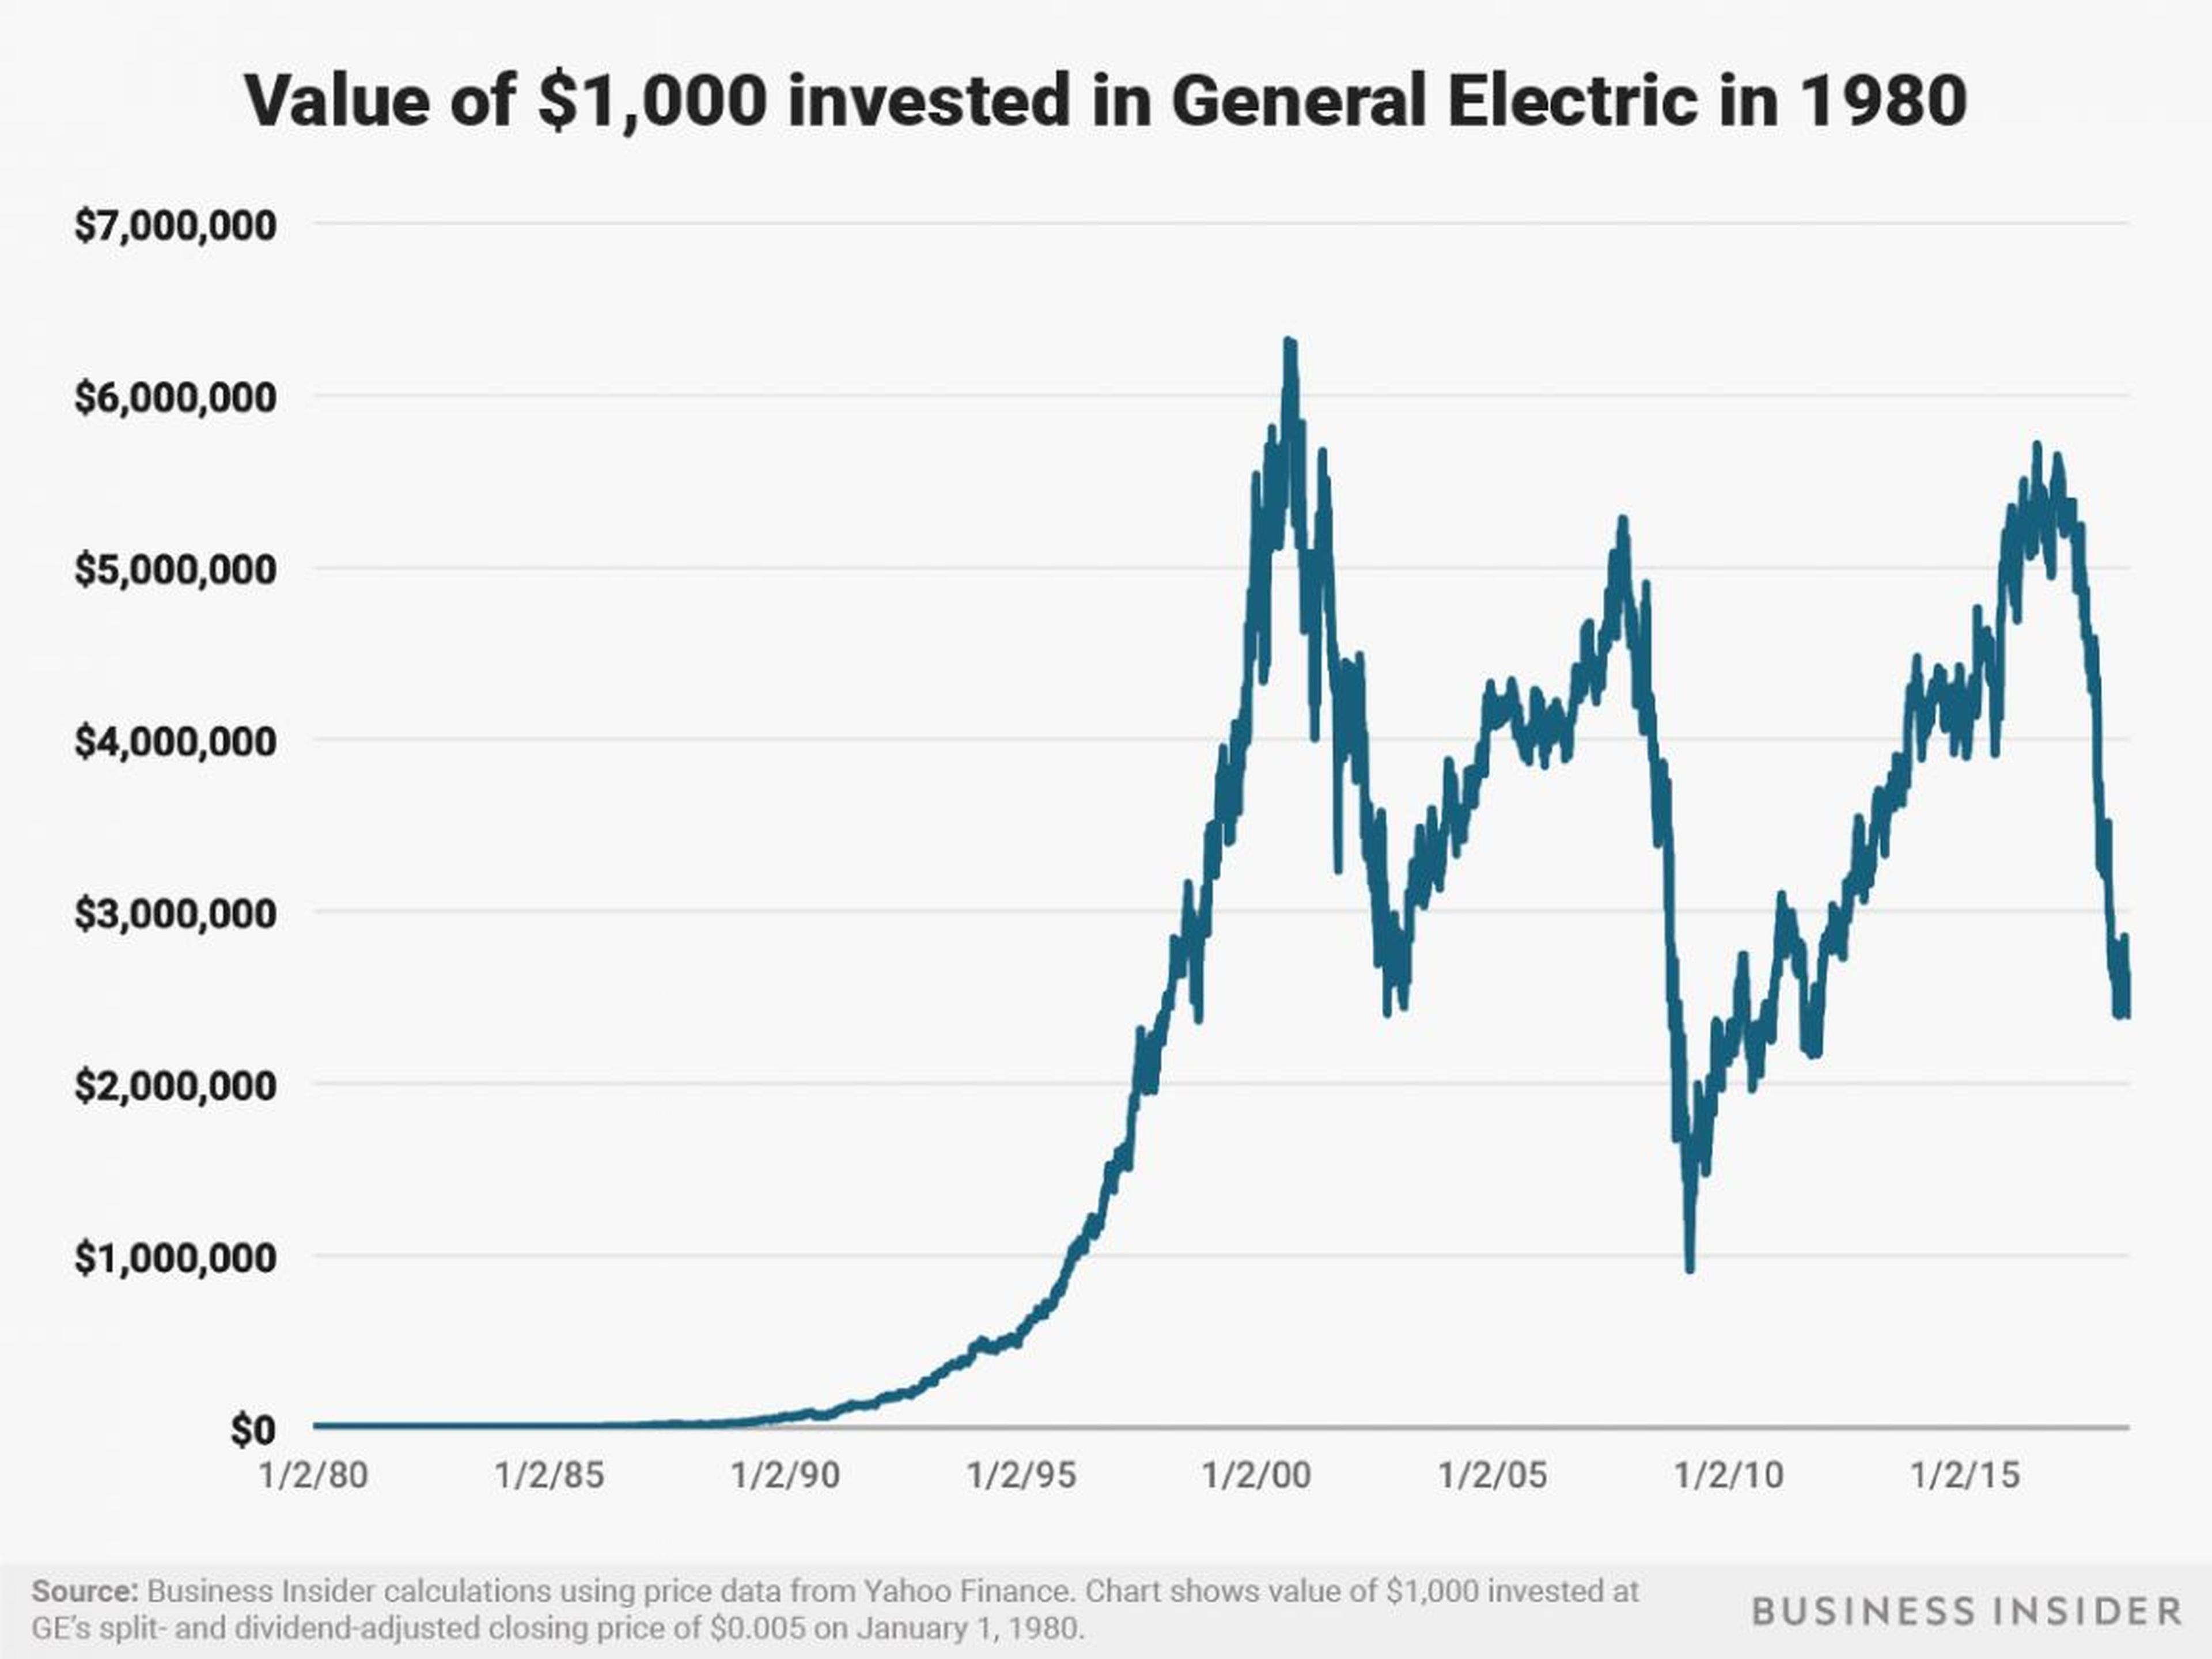 General Electric's fortunes have wildly oscillated over the years. A $1,000 investment at the start of 1980 would be worth about $2.5 million as of July 3, 2018.